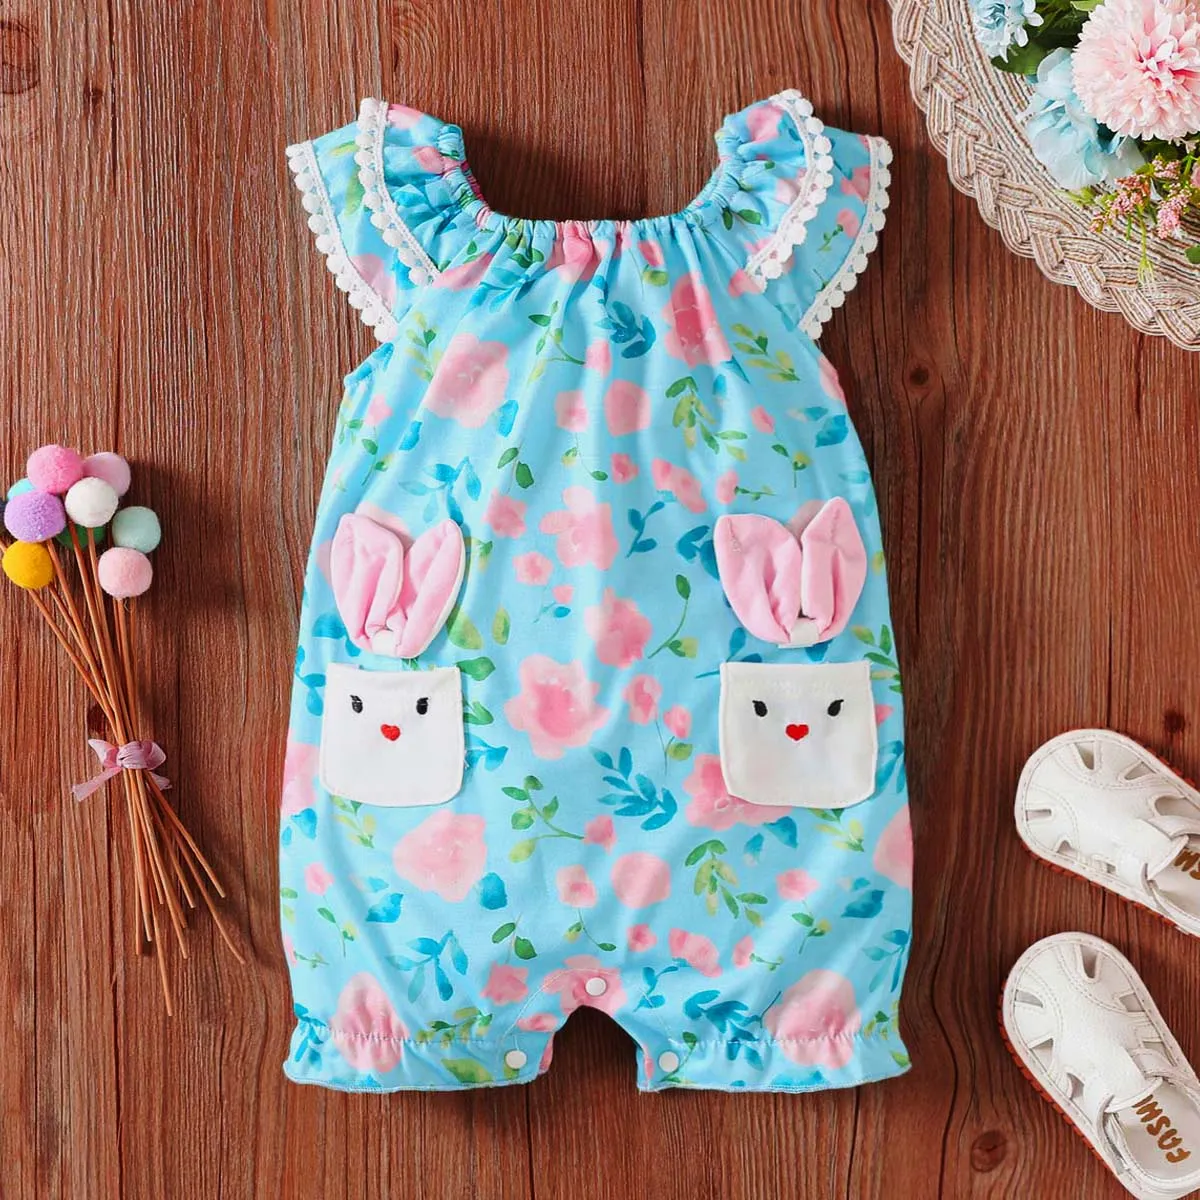 Sweet Baby Girls' Summer Rabbit Romper with Fringed Ball and Floral Lace Detail (1pc) Multi-color big image 1